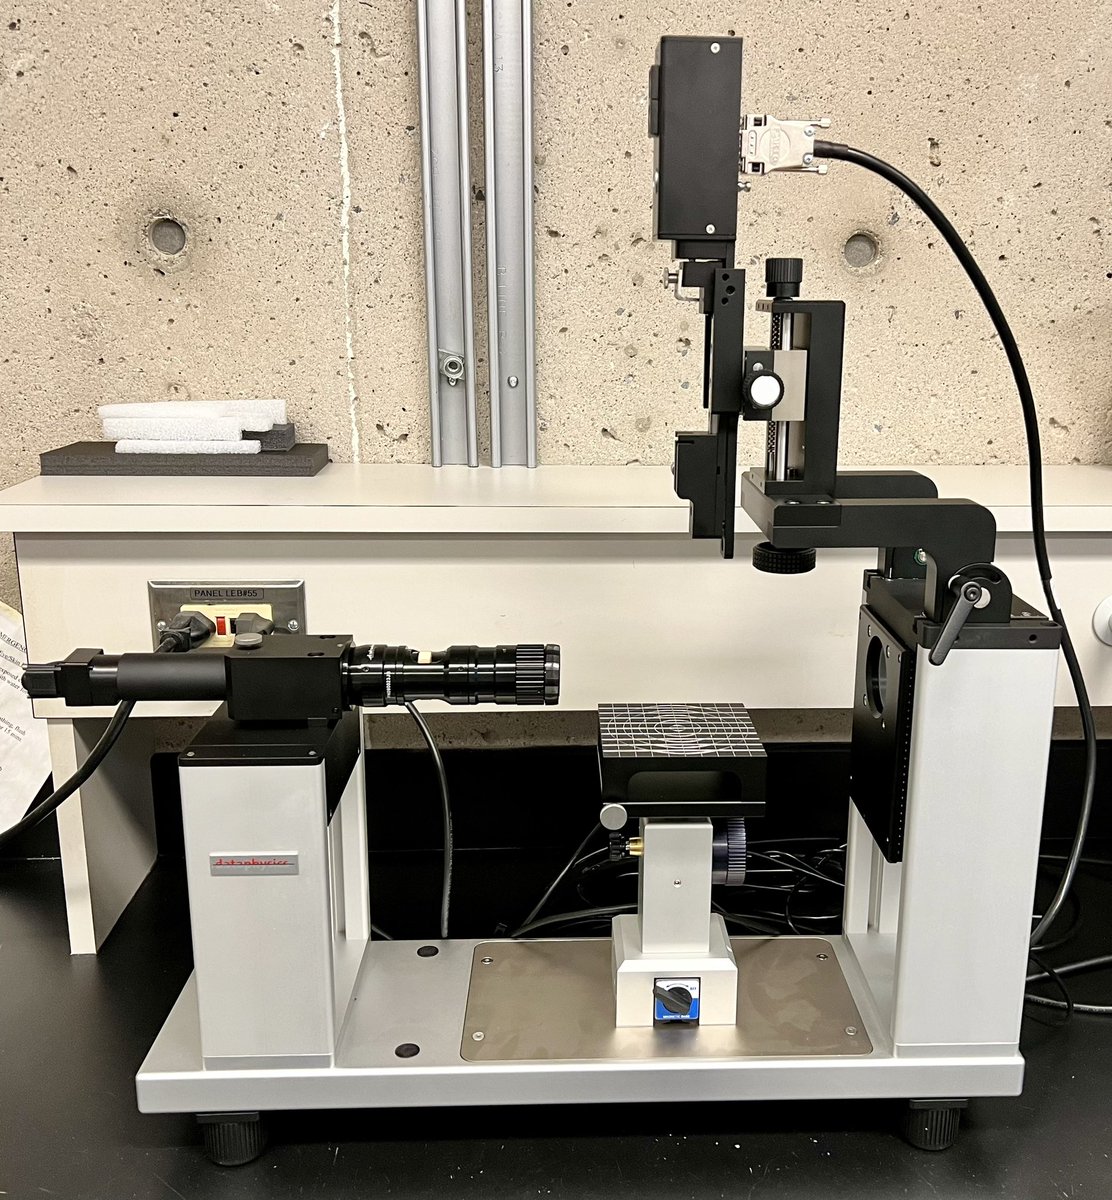 Let's welcome Charles who starts his PhD today with his beautiful shiny new tensiometer….🤩🤩🥳🥳 @UBCGradSchool @UBCBioProducts @ubcLFS